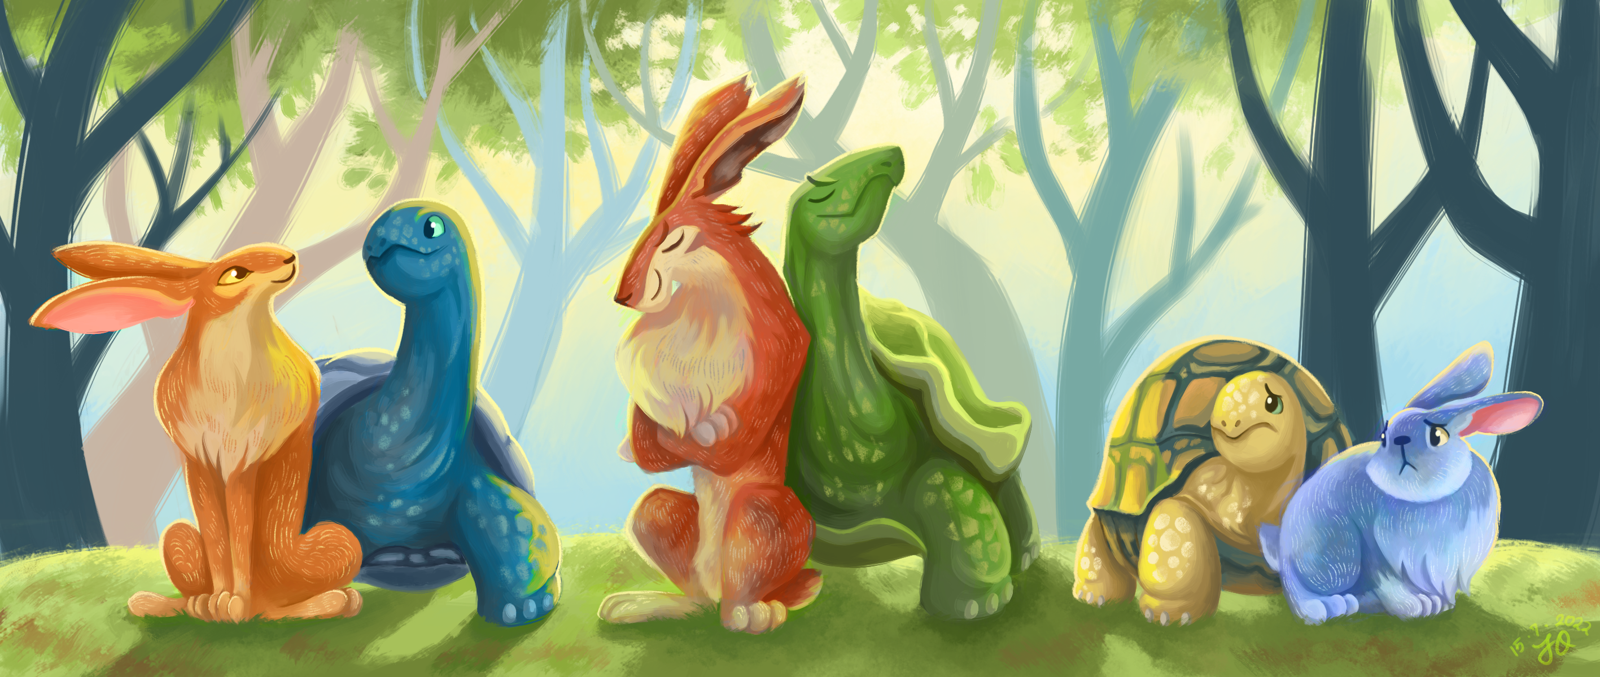 A digitally painted character line-up of 3 pairs of hare-and-tortoise characters. The first hare is sleek and lithe with orange fur and a beige underbelly. She is sitting with her chestup and rump and forepaws on the ground, and is looking at her tortoise companion contently and confidently. Her toirtoise companion has blue-gray skin and a pale blue-gray shell, and has his head perked up and also looking at her contentedly. The second hare is larger and scruffier with red fur and a beige underbelly. He is sitting with his front paws folded, head tilted down, and eyes closed with a proud expression on his face. His tortoise companion, who has an angular head, also has his neck extended and head cocked up proudly. The final rabbit is a purplish-gray-blue and is a very short, round and plump fellow. He looks slightly worried as if afraid of the second tortoise. His tortoise companion is looking in the same direction, also worried, and has yellow skin and a dark blue-green shell with ochre patches.